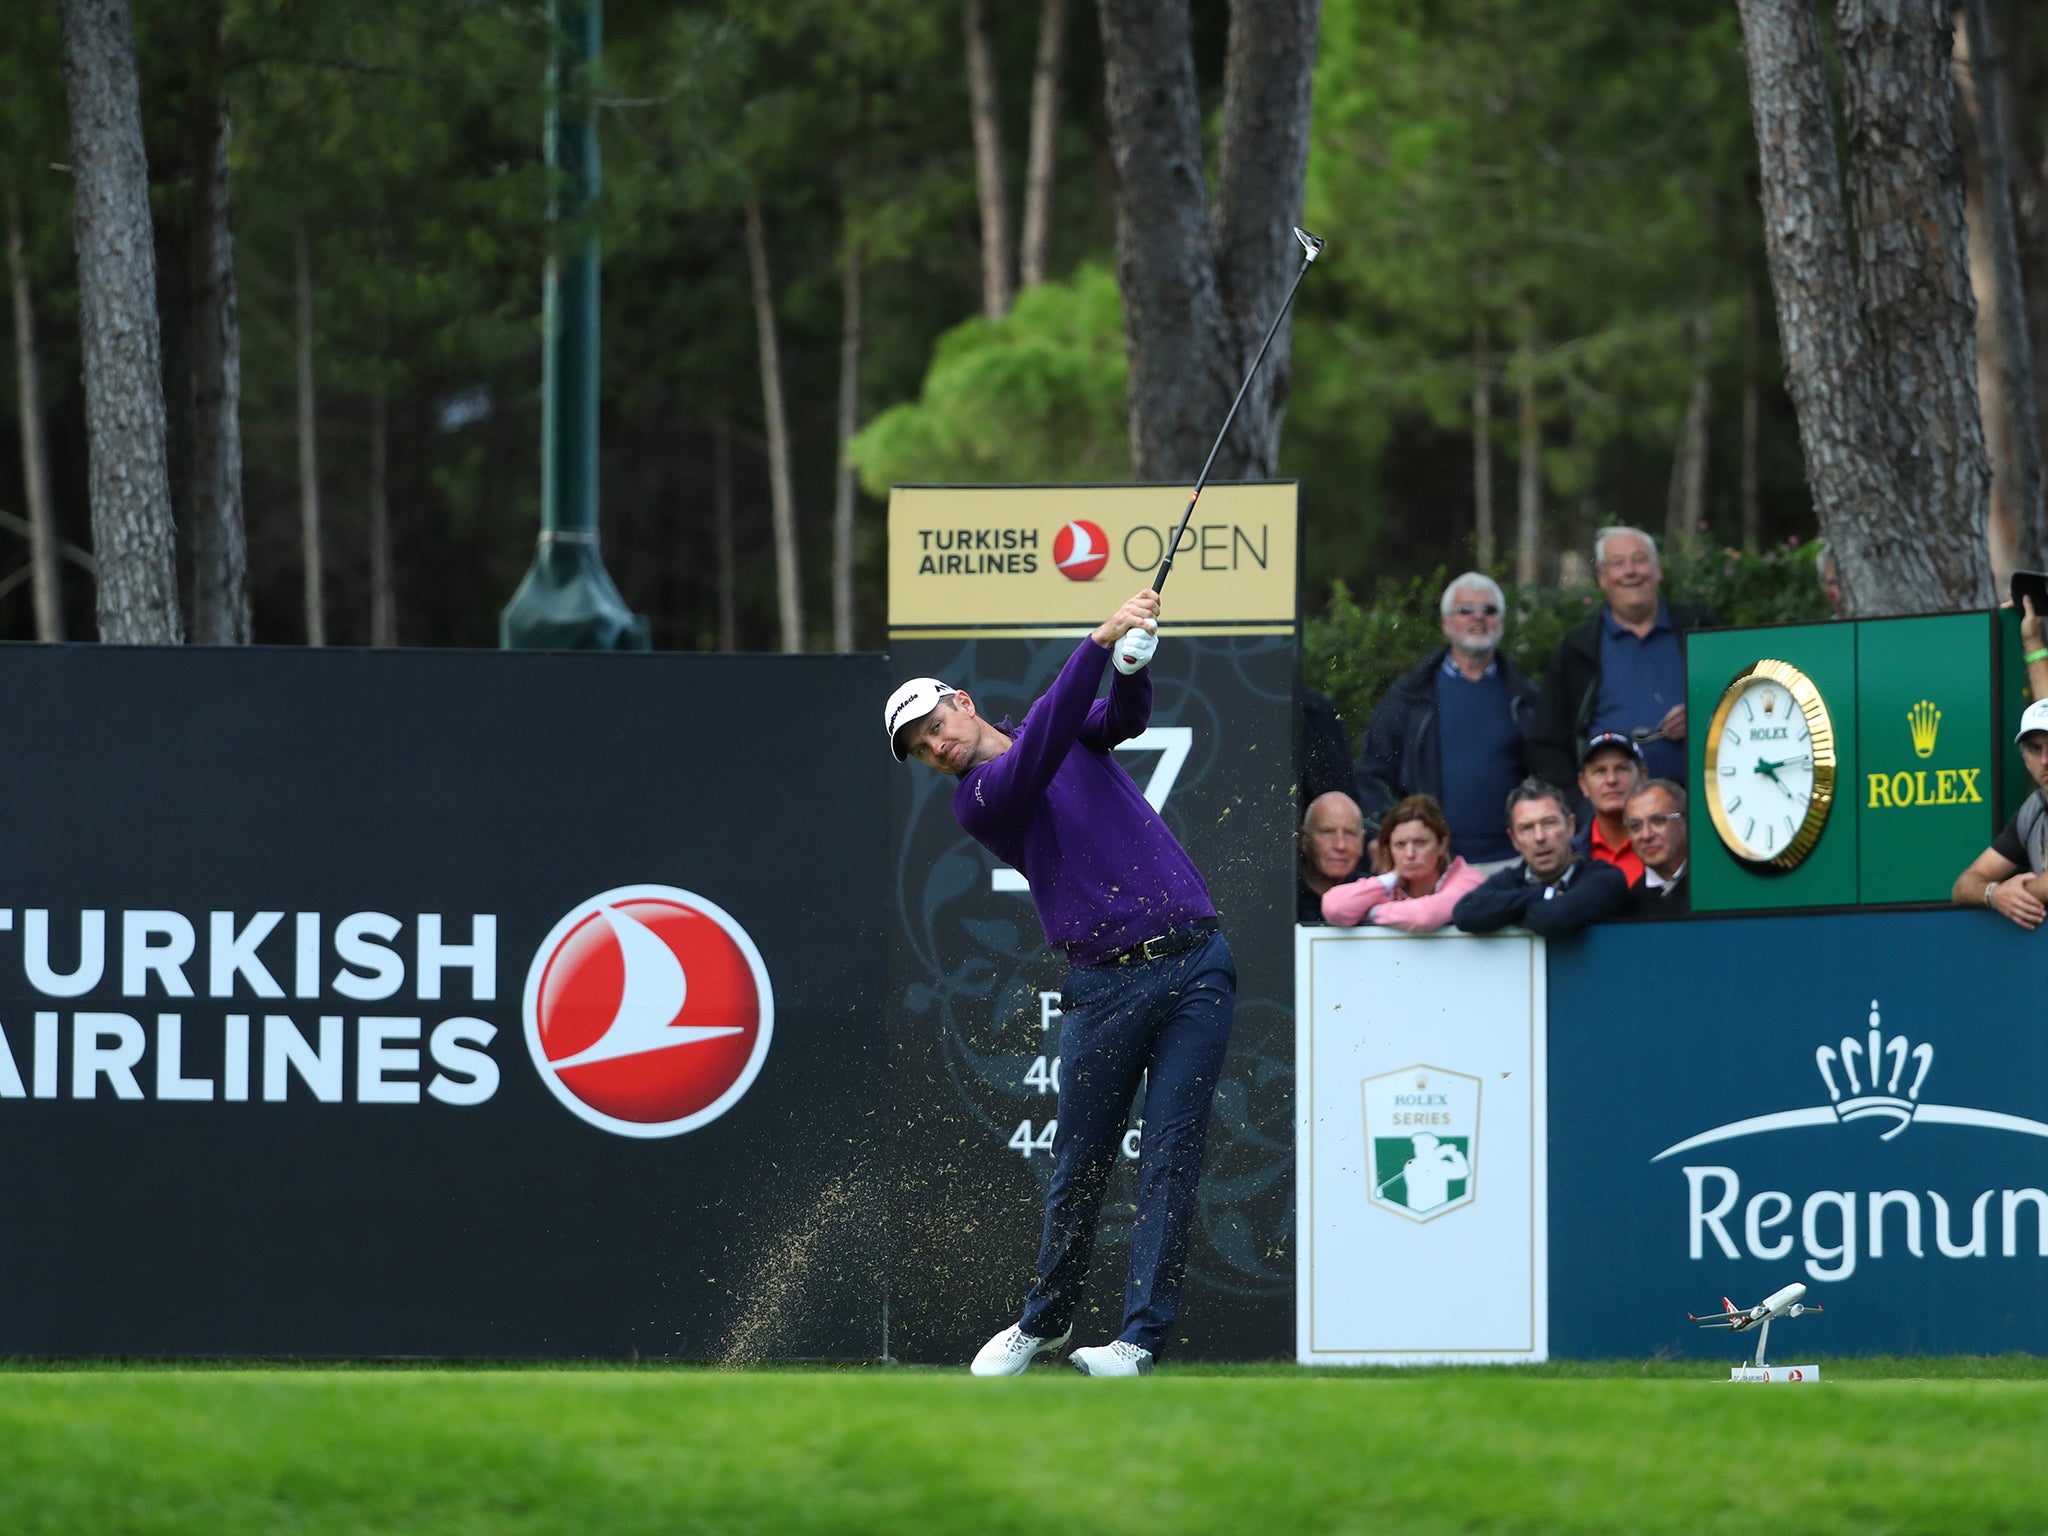 Rose carded a final-day 65 to overtake Nicolas Colsaerts